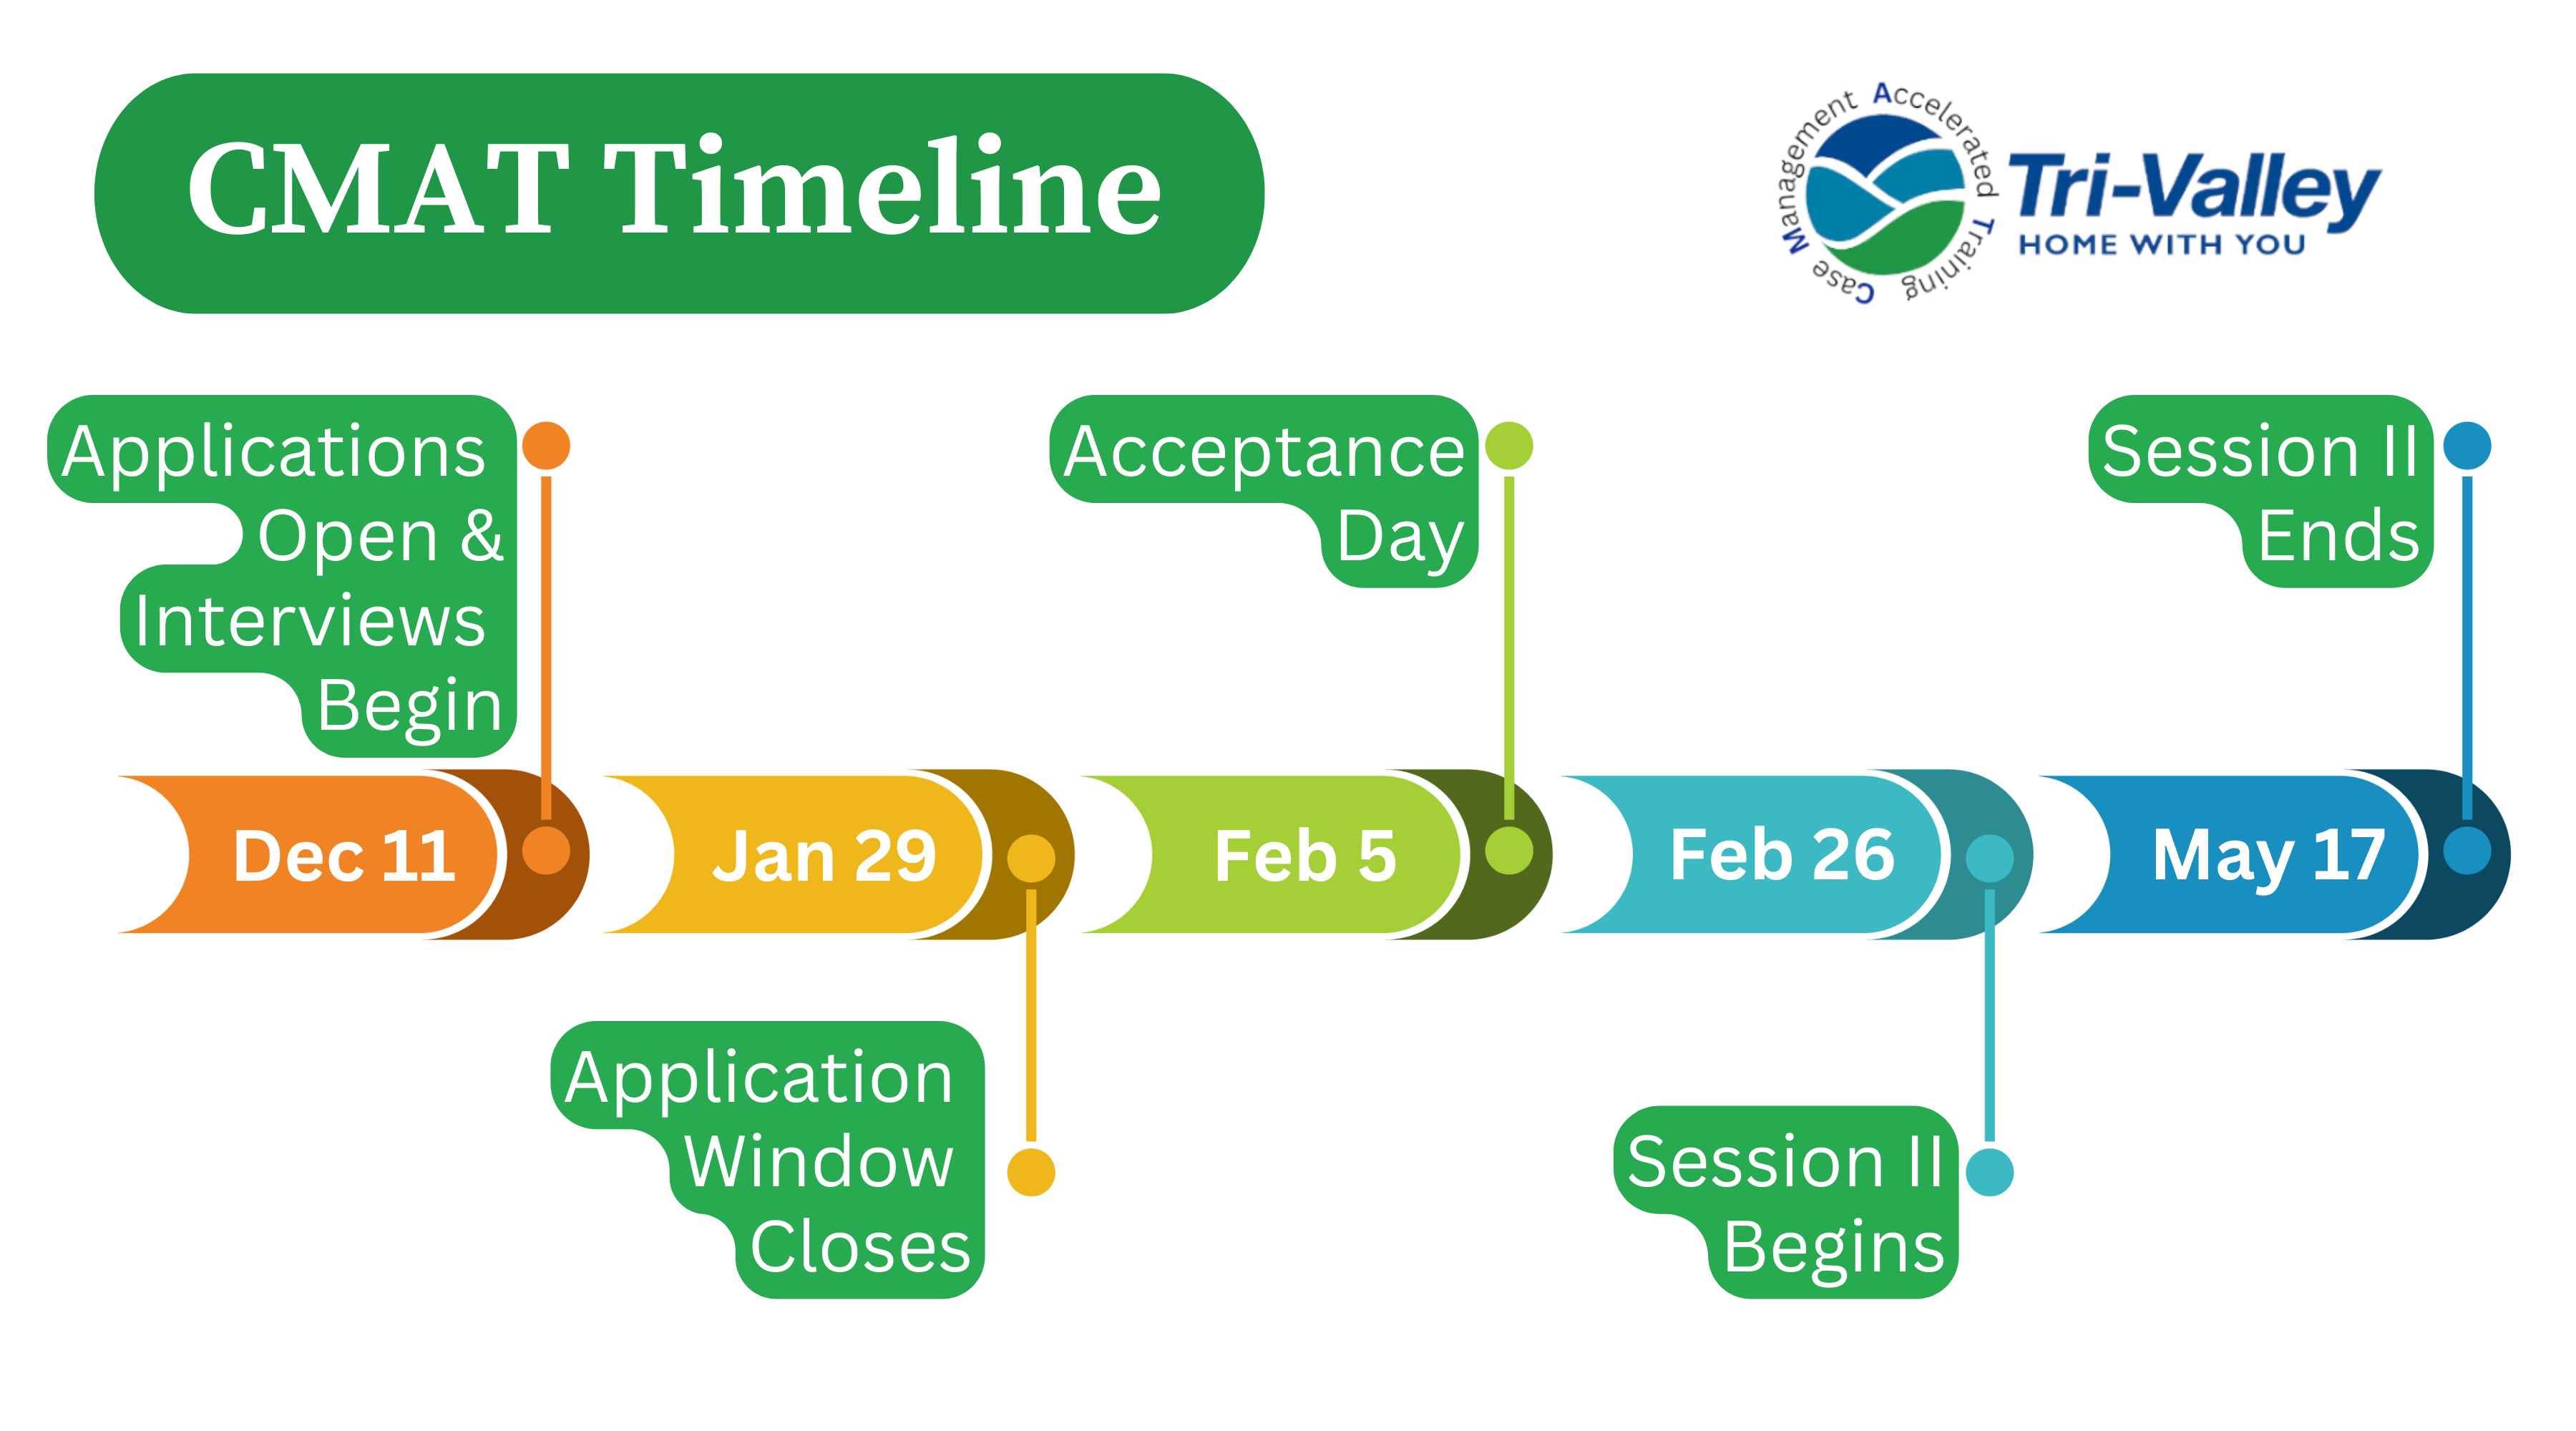 A timeline of the second session of the CMAT program.